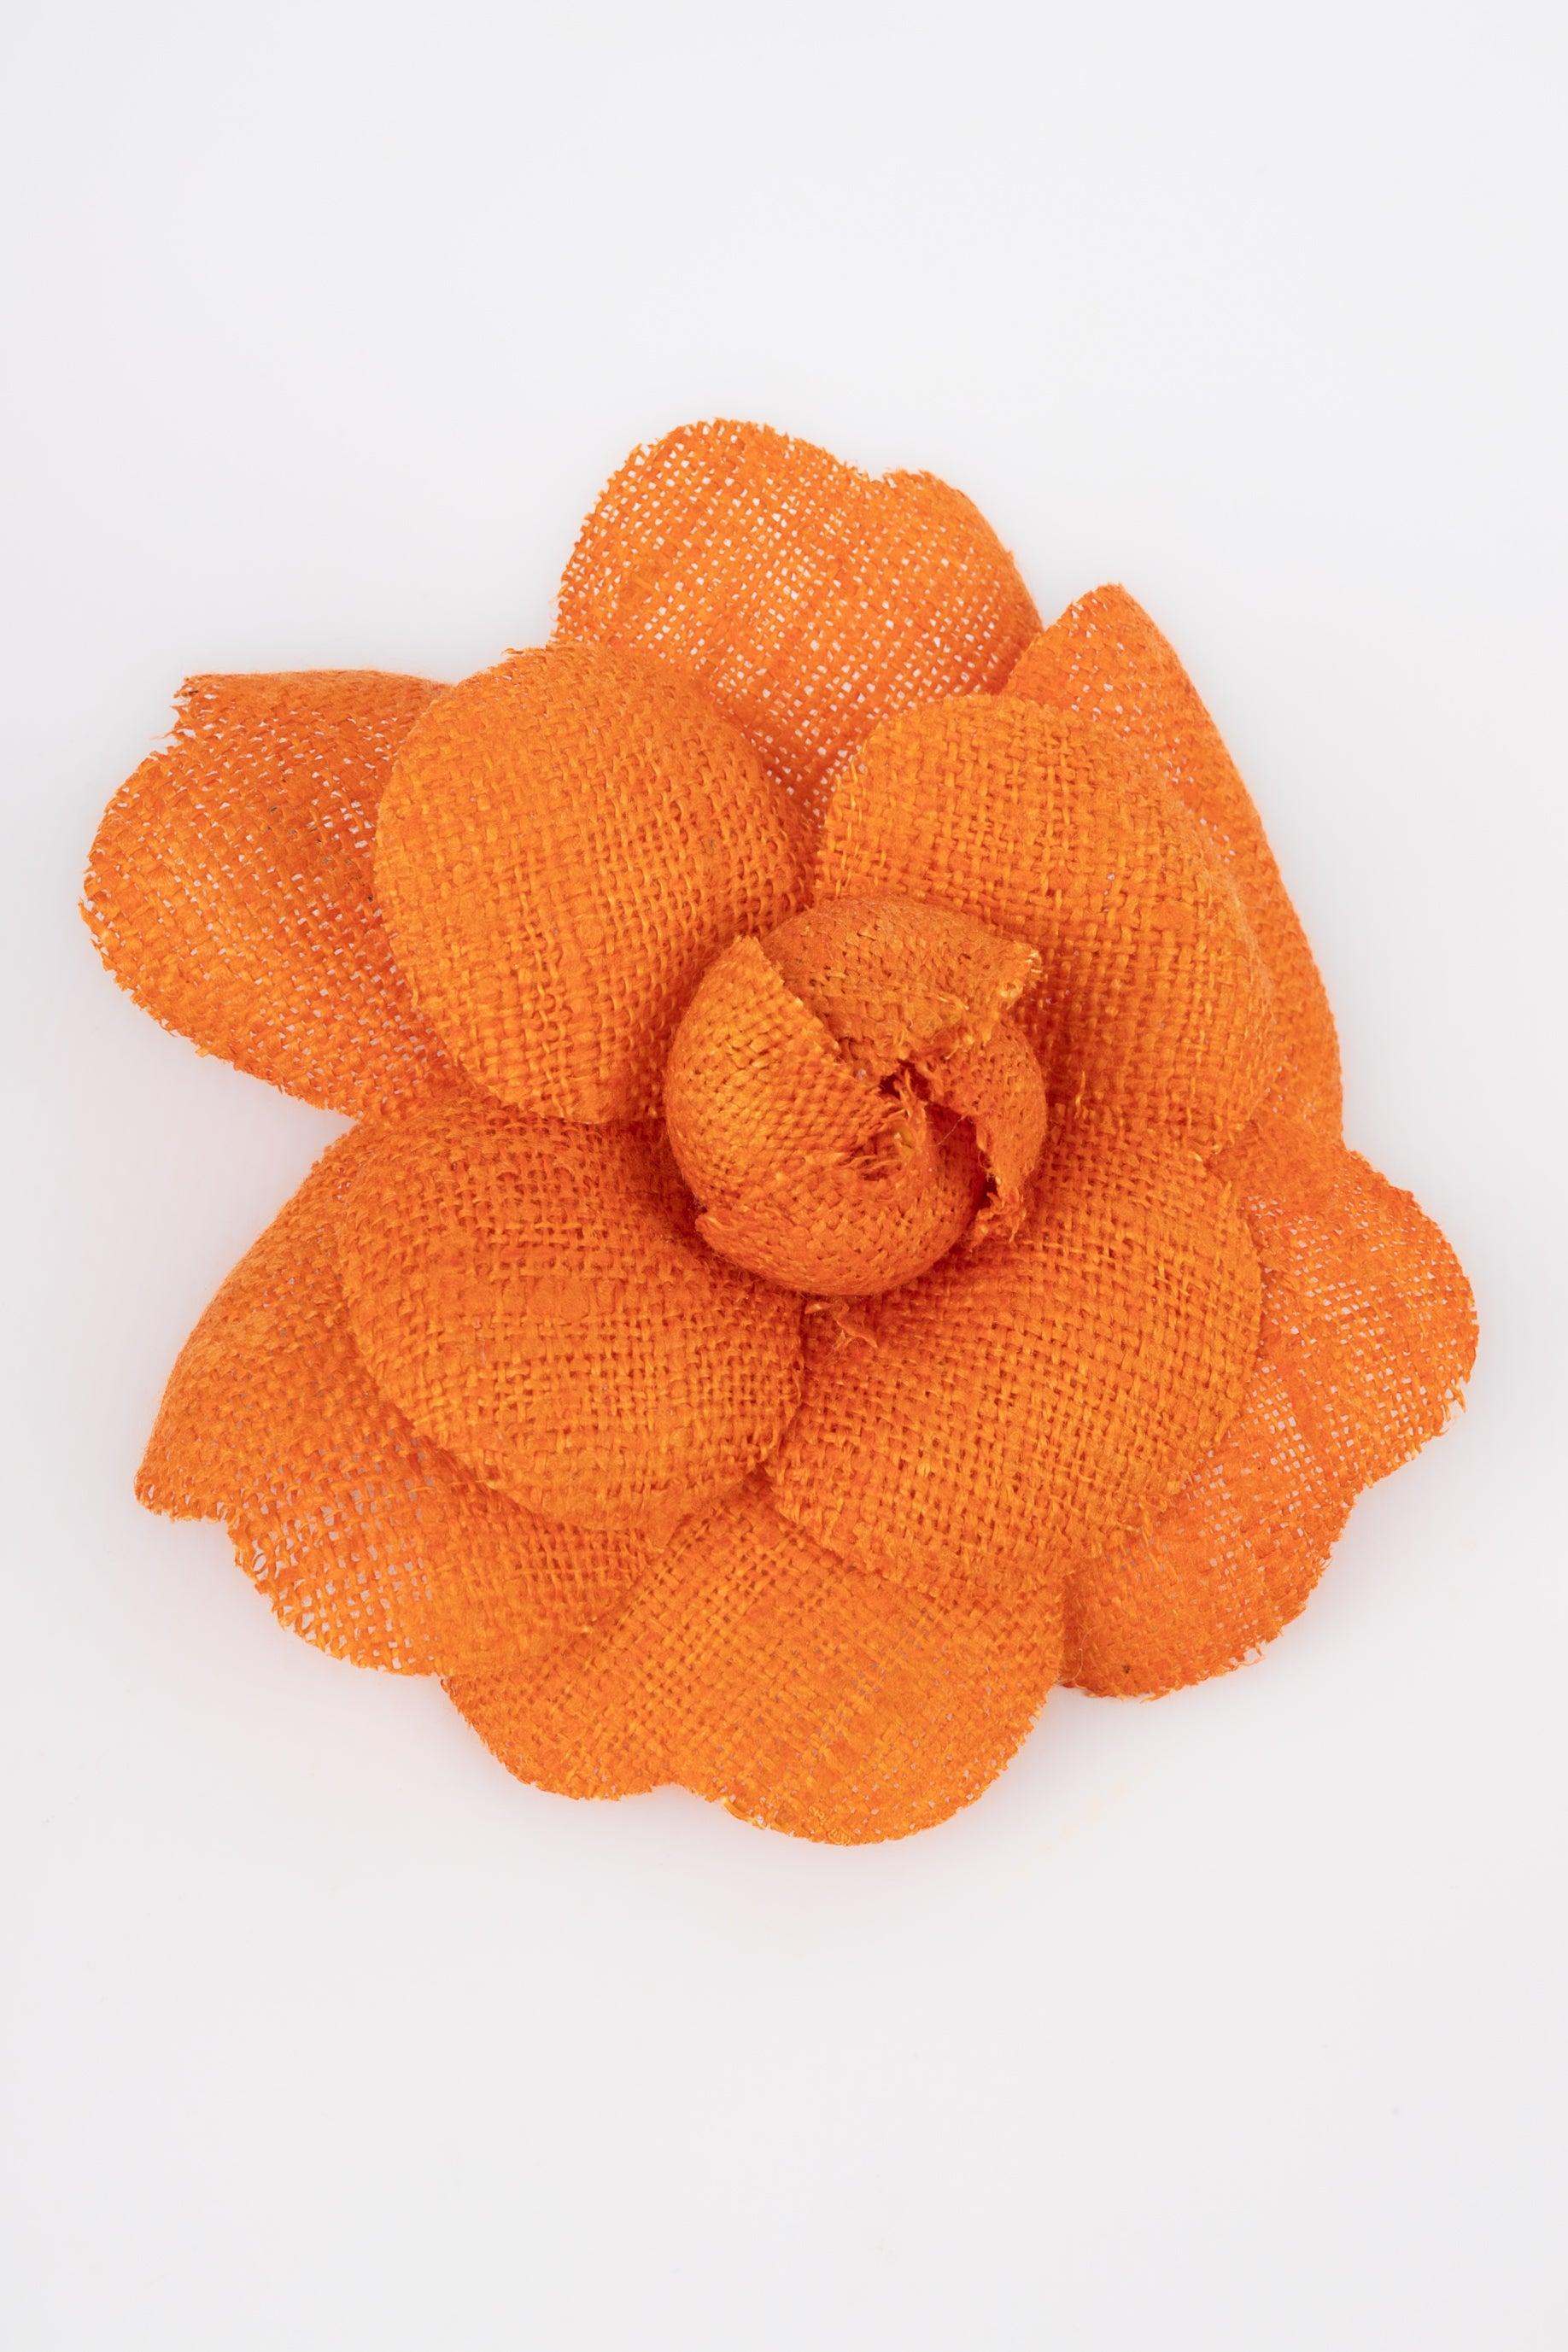 Chanel - Orange camellia brooch. Not signed jewelry.
 
 Additional information: 
 Condition: Good condition
 Dimensions: Height: 9 cm
 
 Seller Reference: BRB123